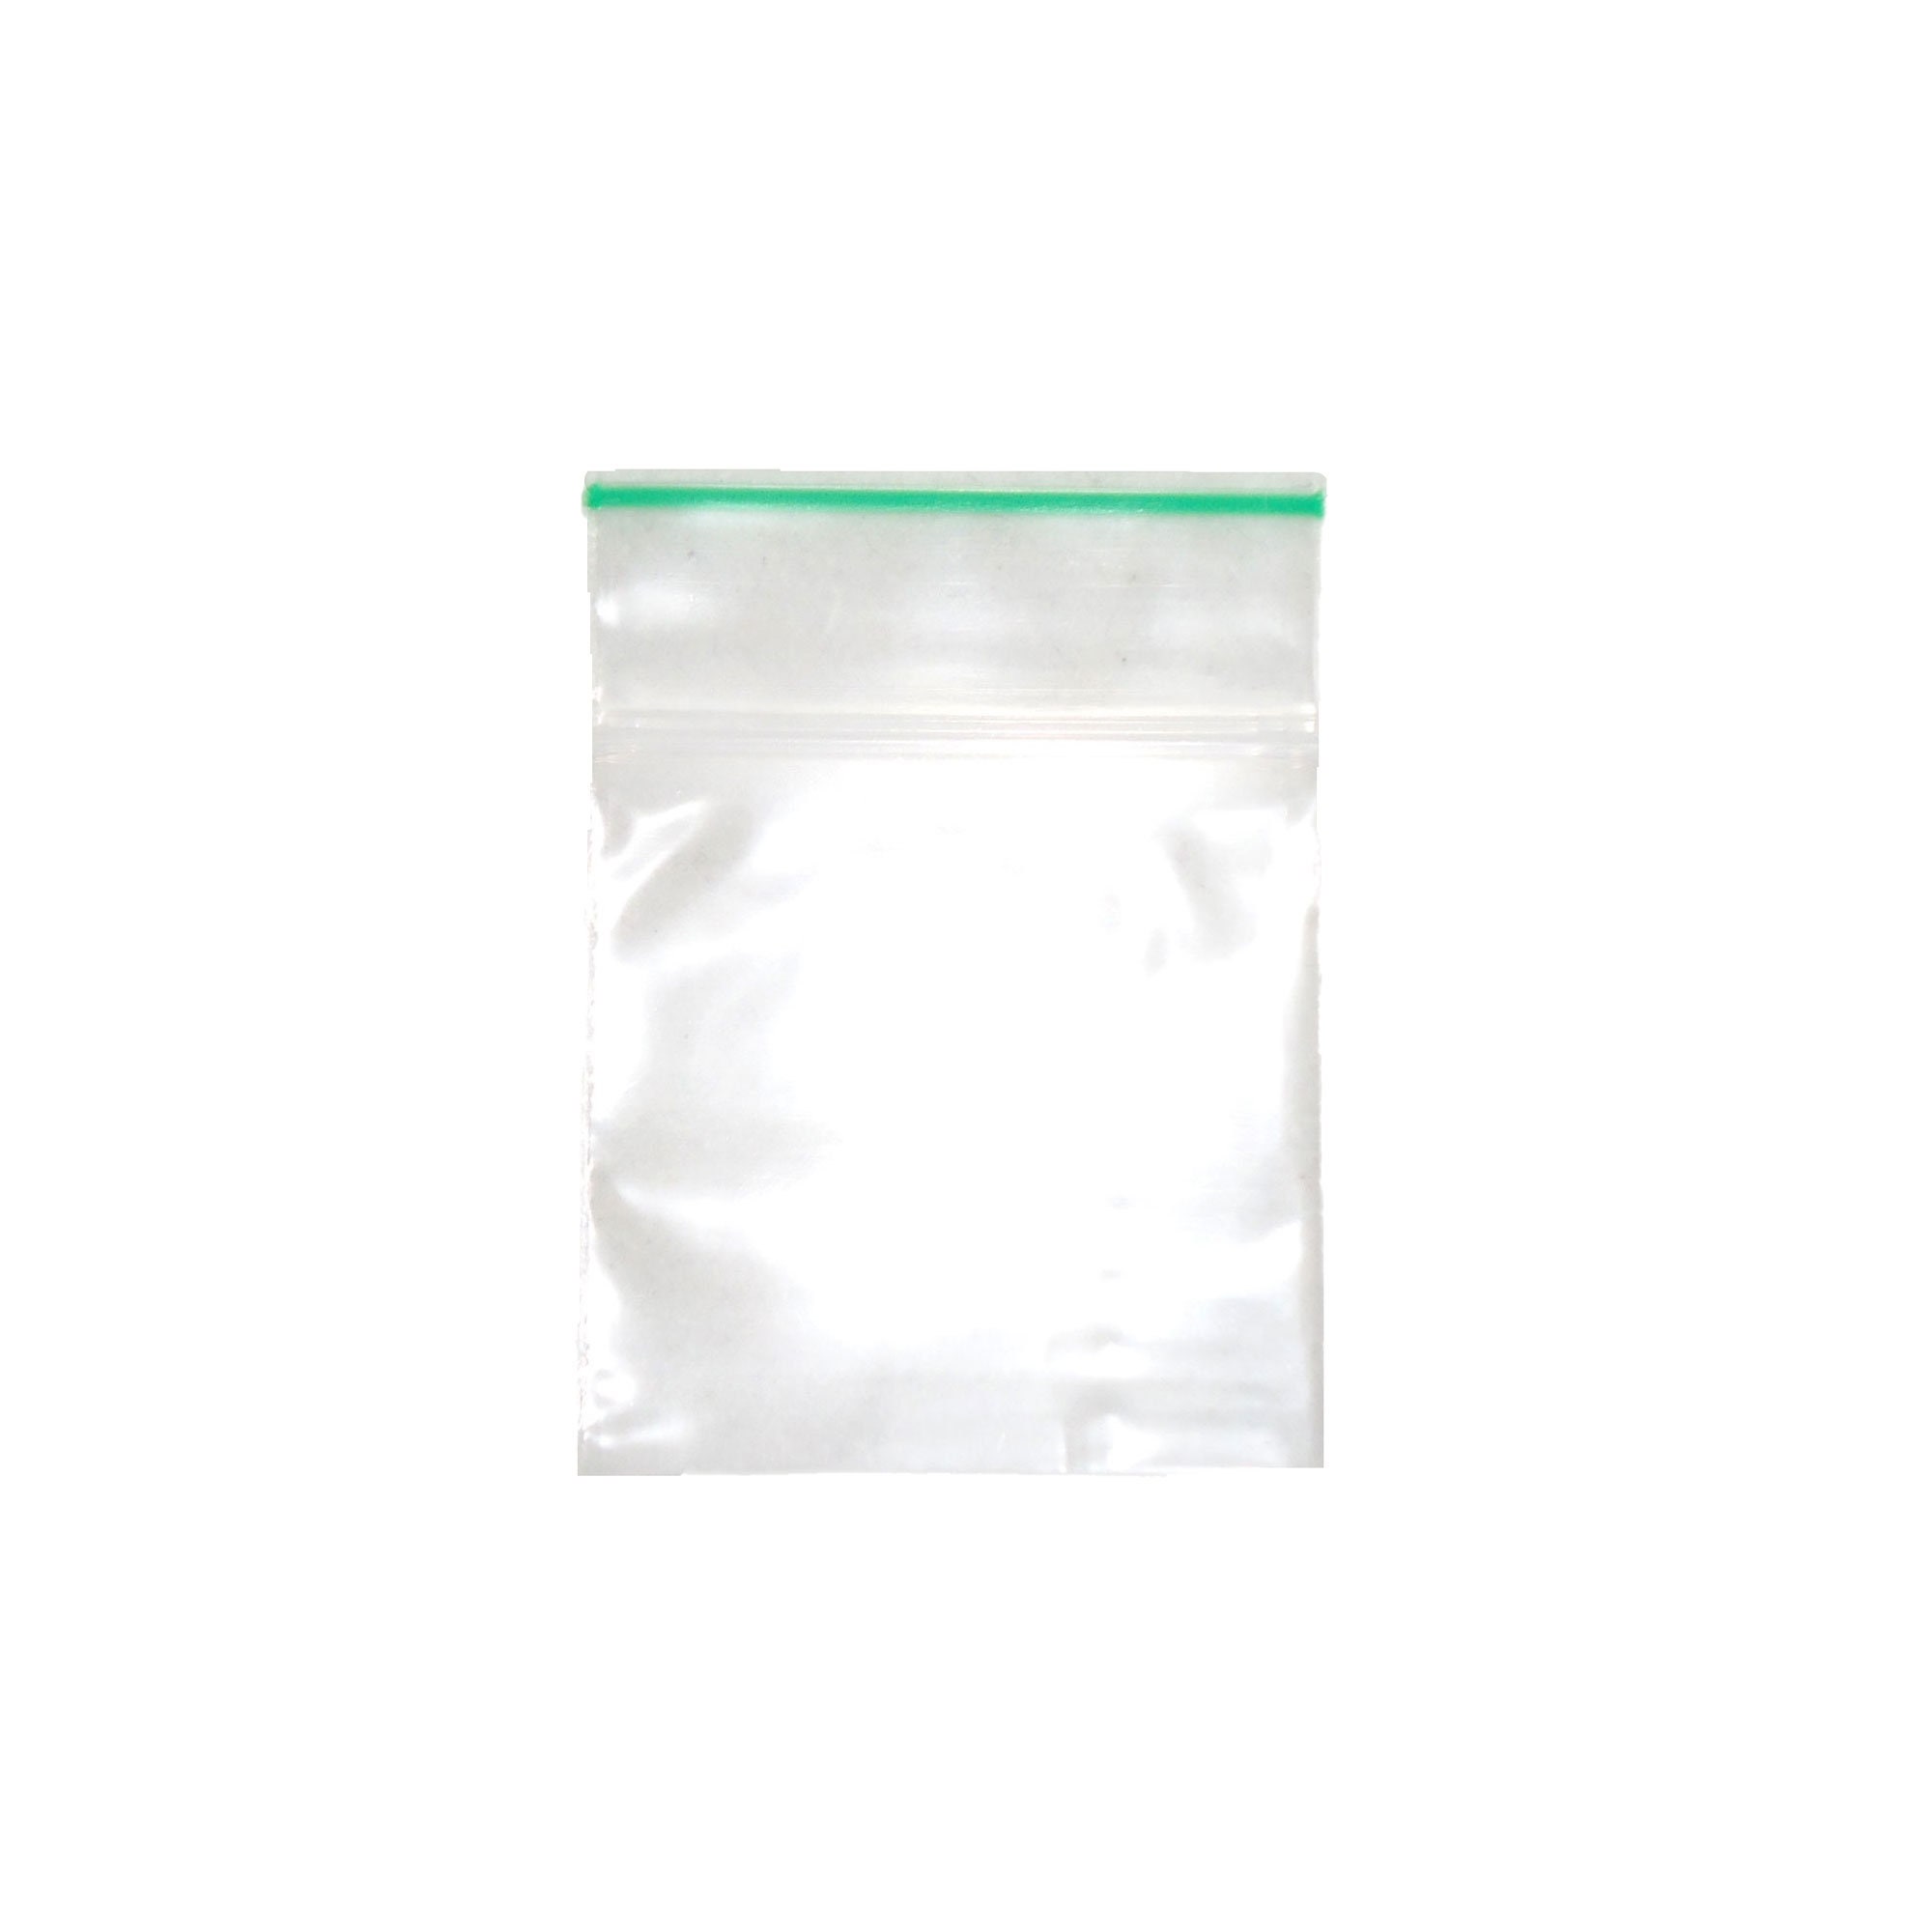 200ct Clear Plastic Bags 4x6-1.4 Mils Thick Self Sealing OPP Cello Bags for 4